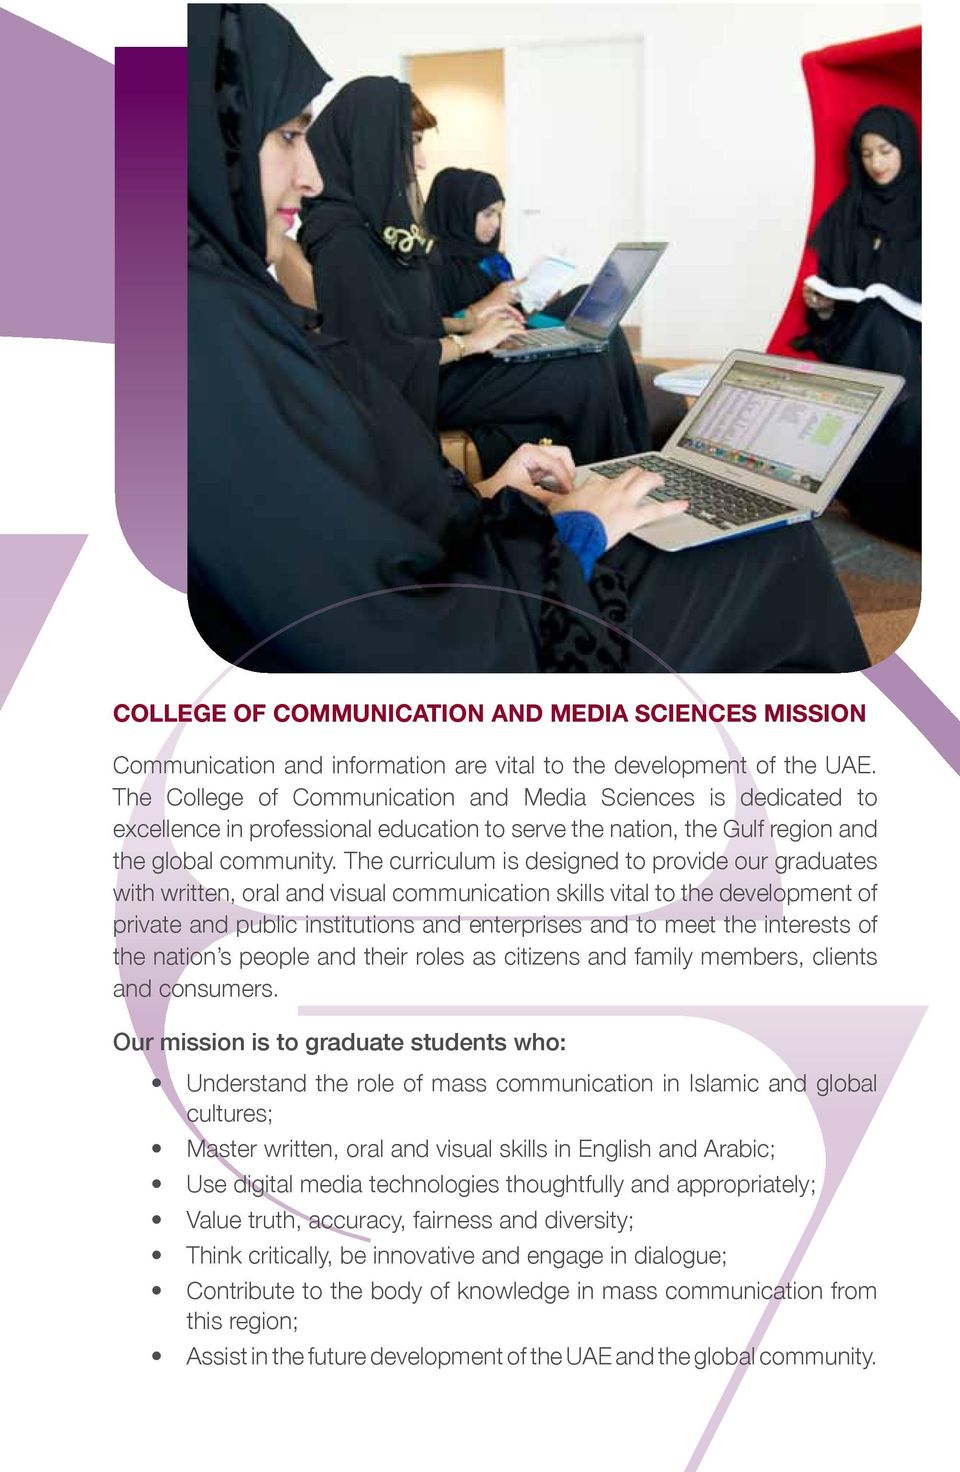 The curriculum is designed to provide our graduates with written, oral and visual communication skills vital to the development of private and public institutions and enterprises and to meet the